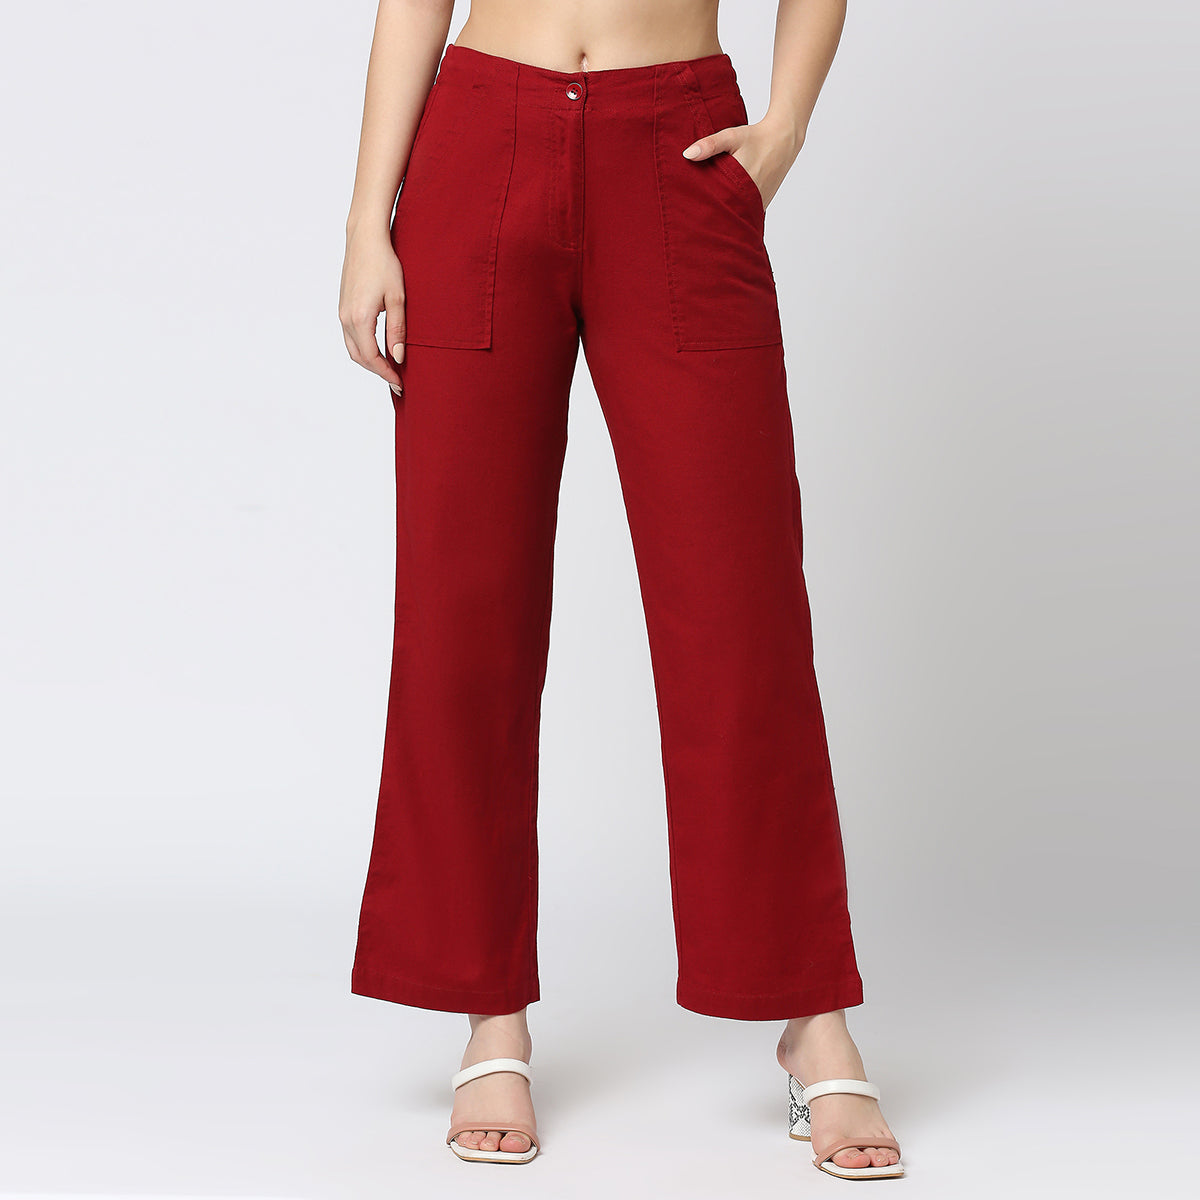 RED COTTON TROUSER